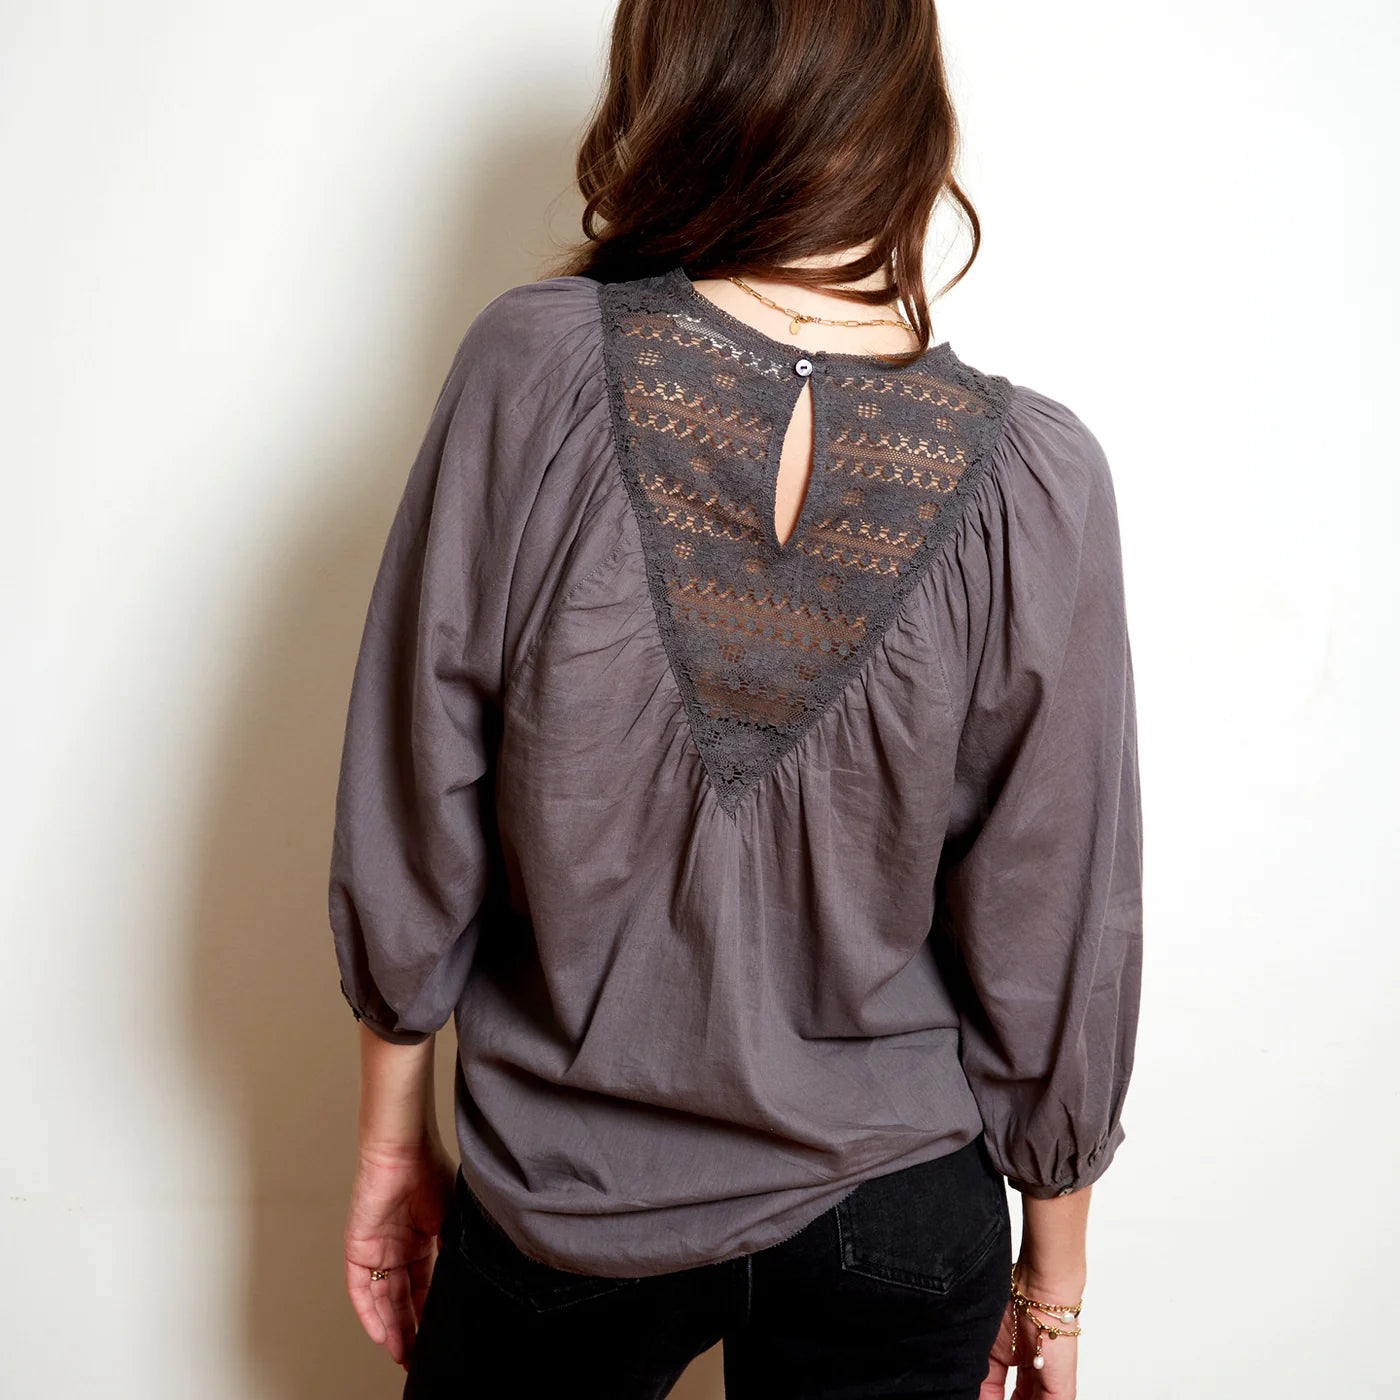 Angel Blouse - 40% OFF AT CHECKOUT